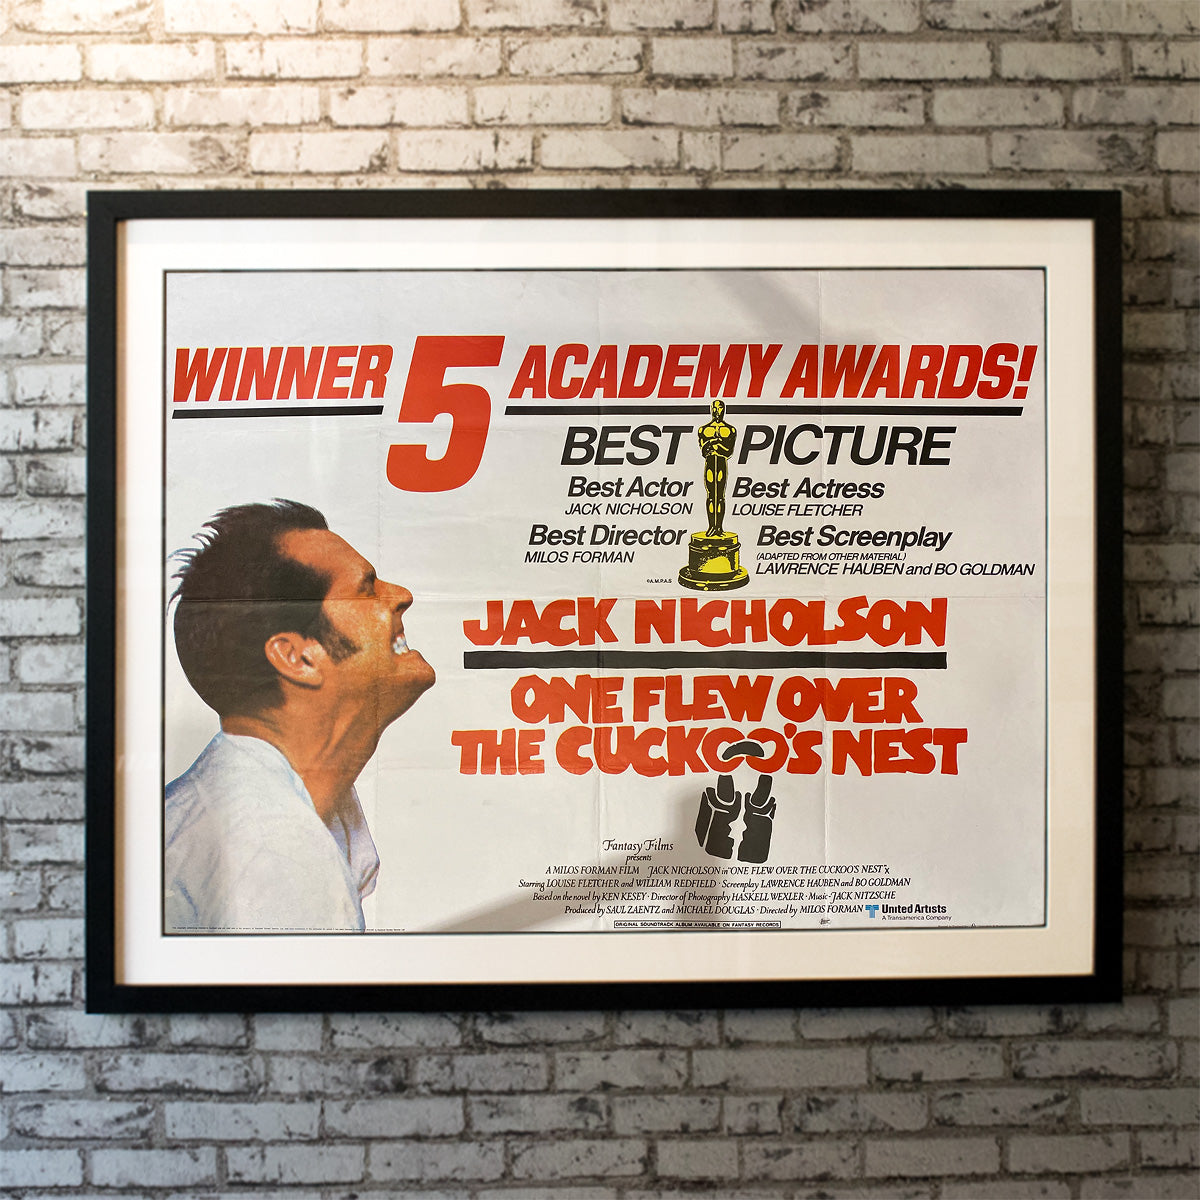 Original Movie Poster of One Flew Over The Cuckoo's Nest (1975)